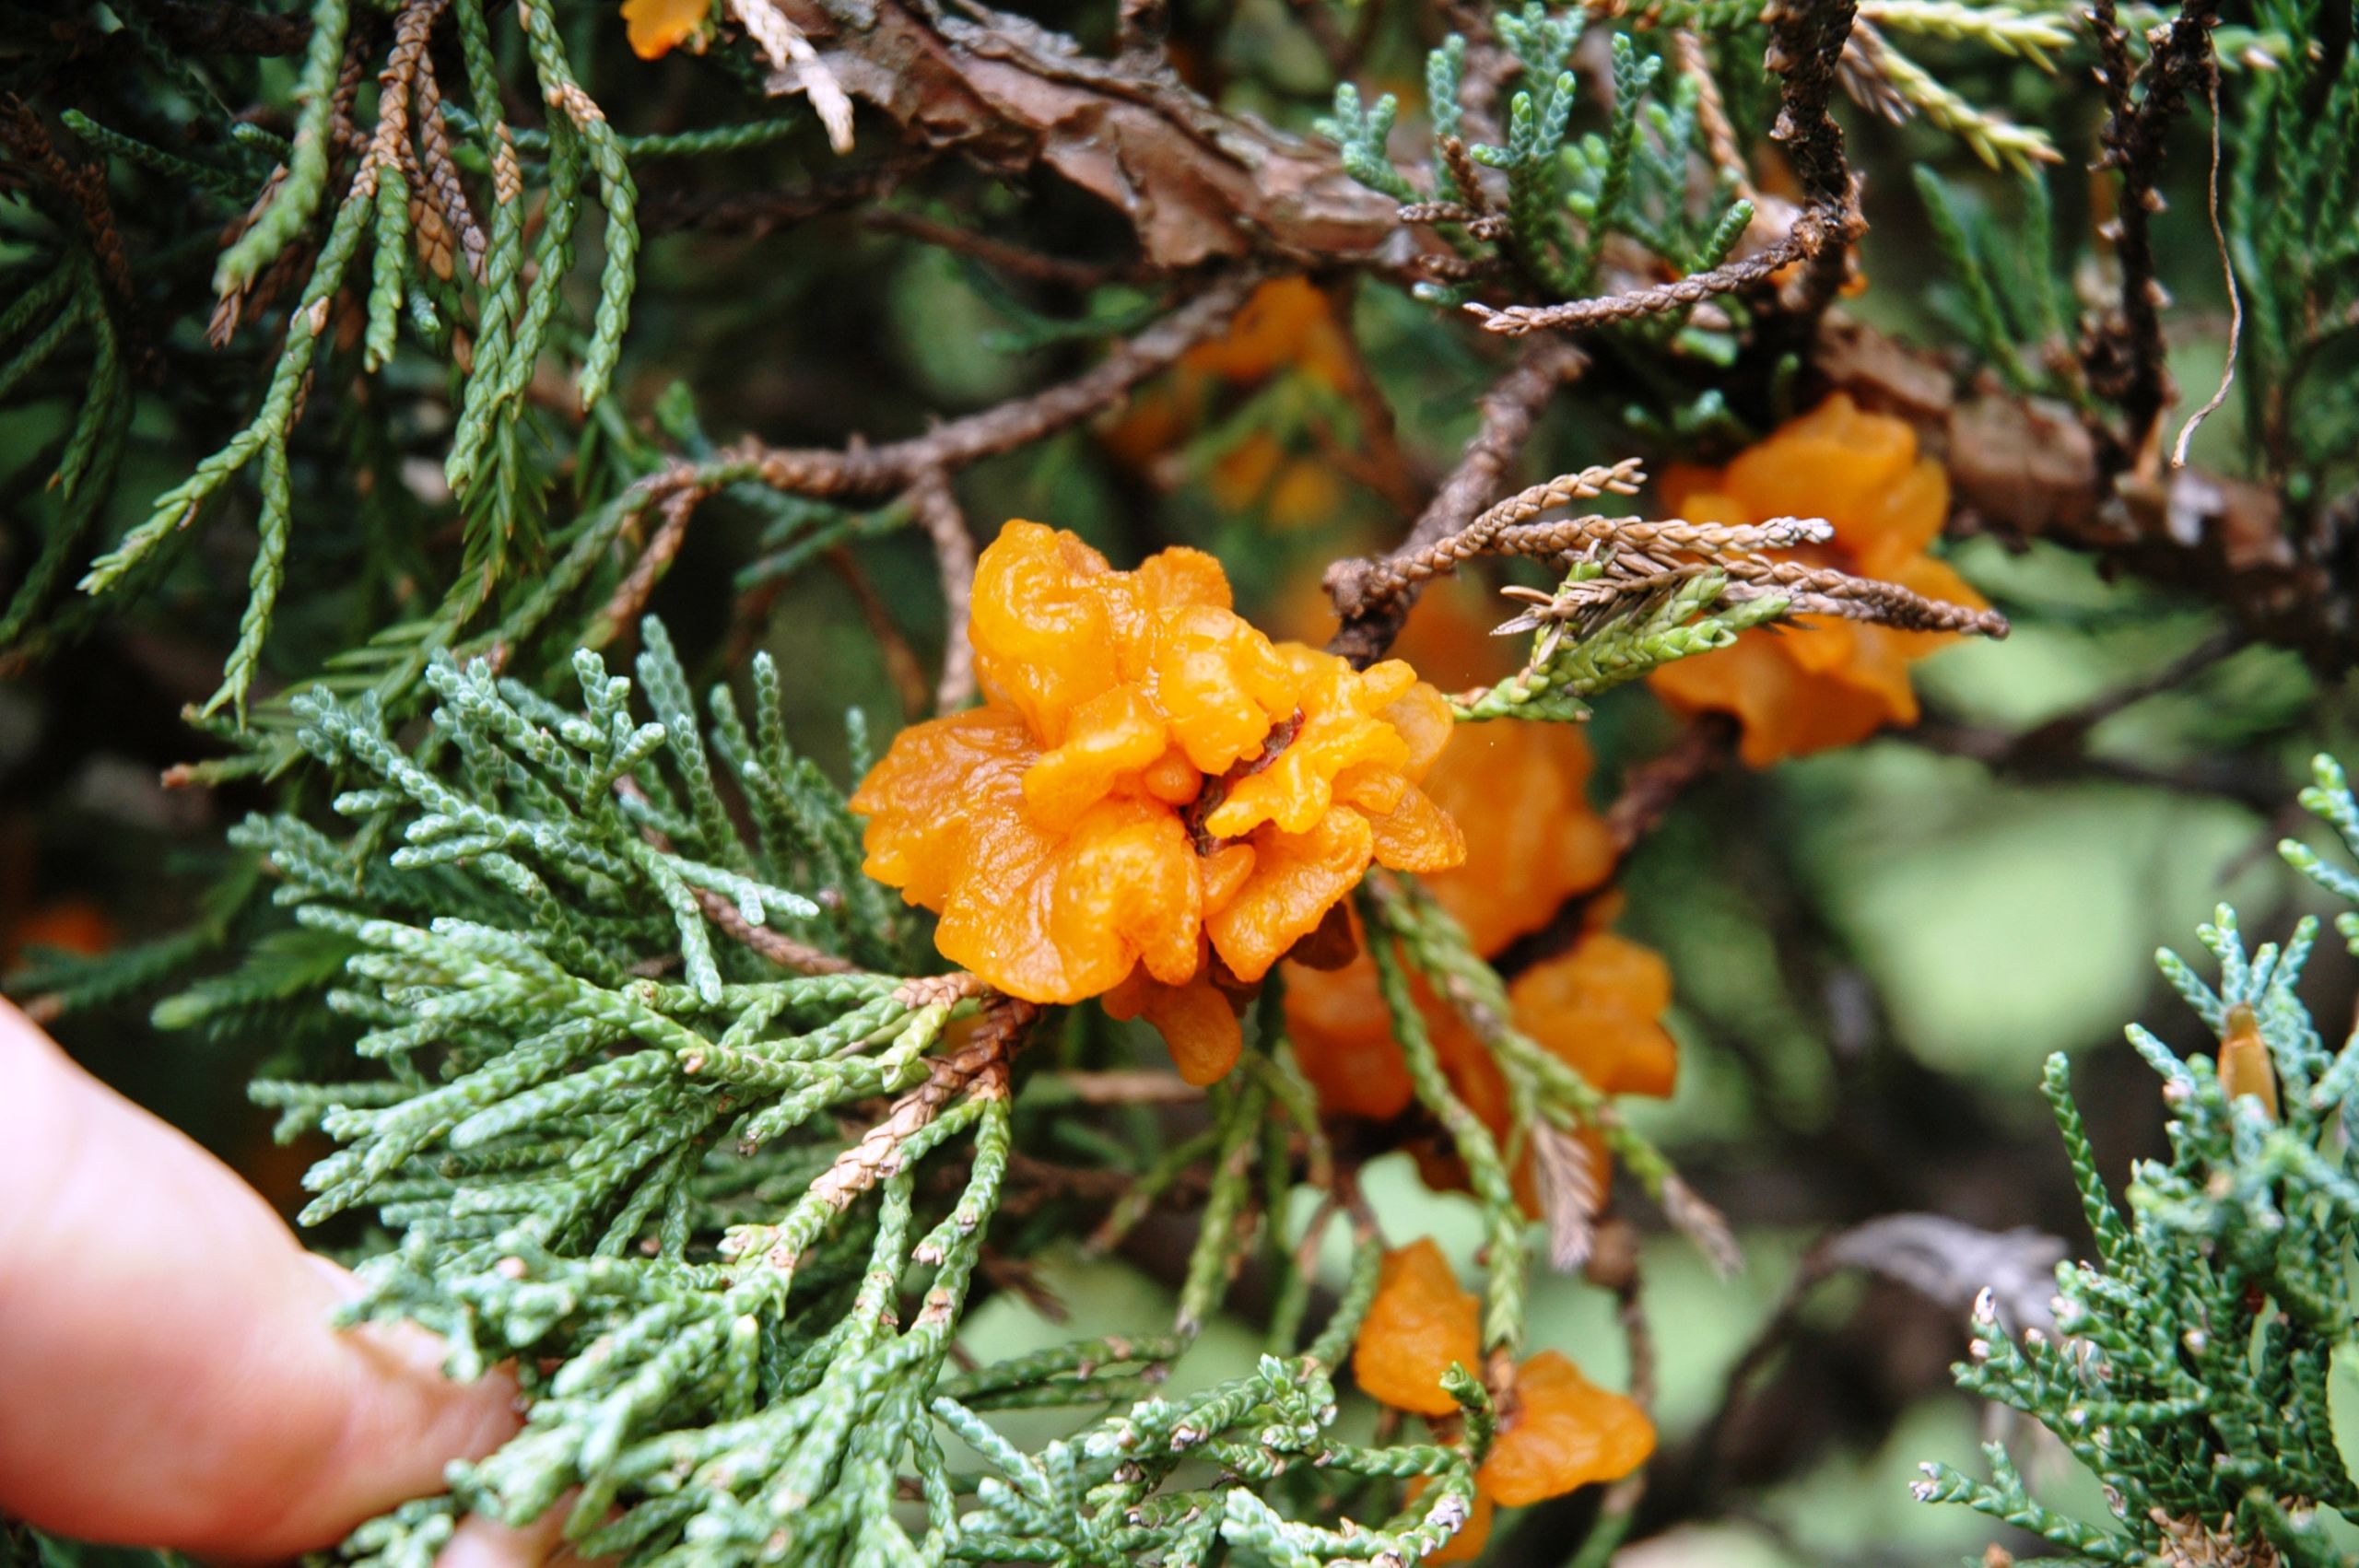 close up of apple rust, which looks almost flowery, on a cedar twig